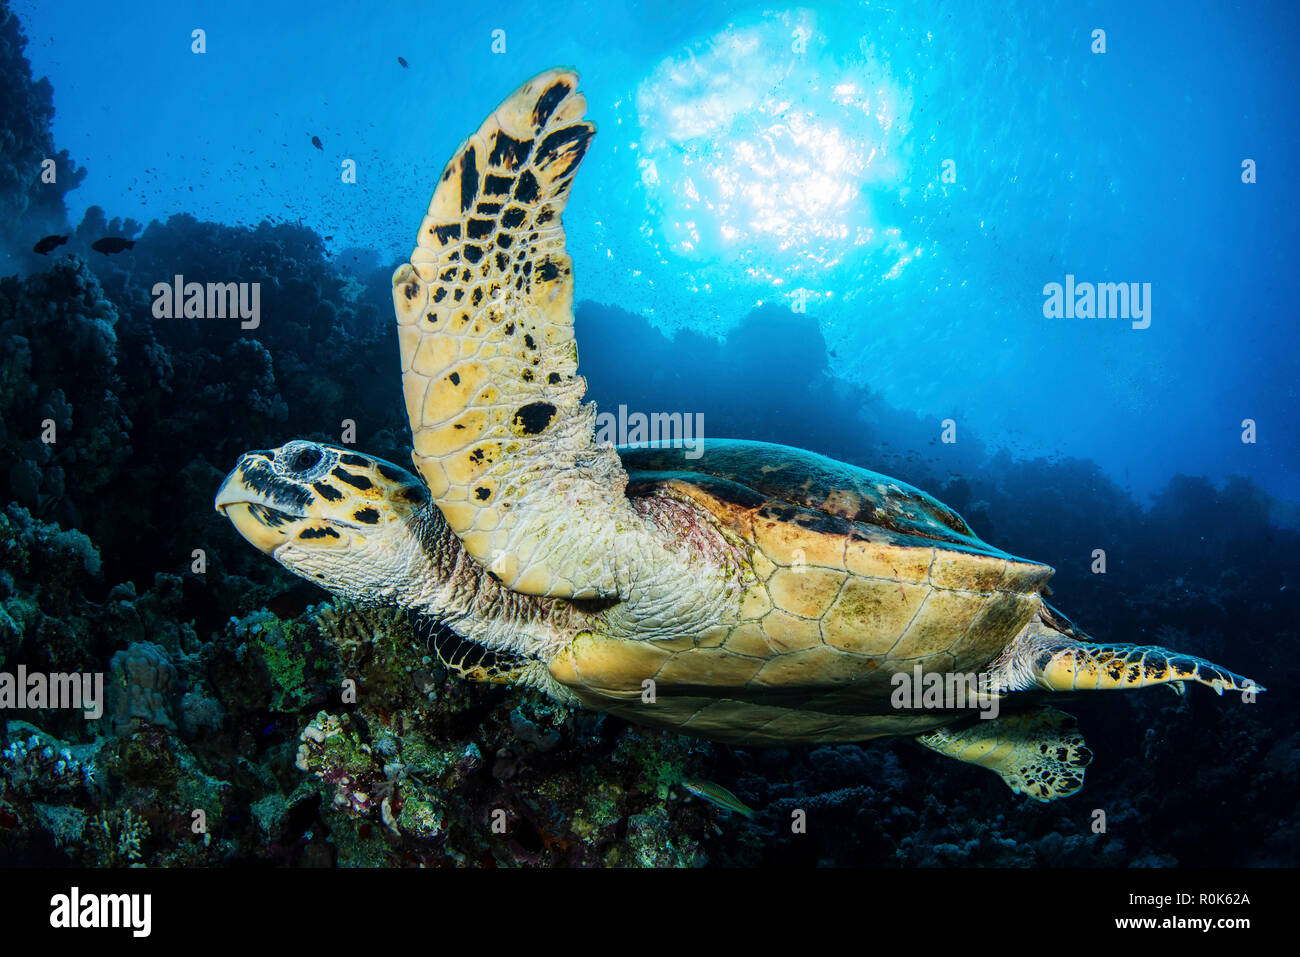 A hawksbill turtle glides through the water on a sunny day. Stock Photo